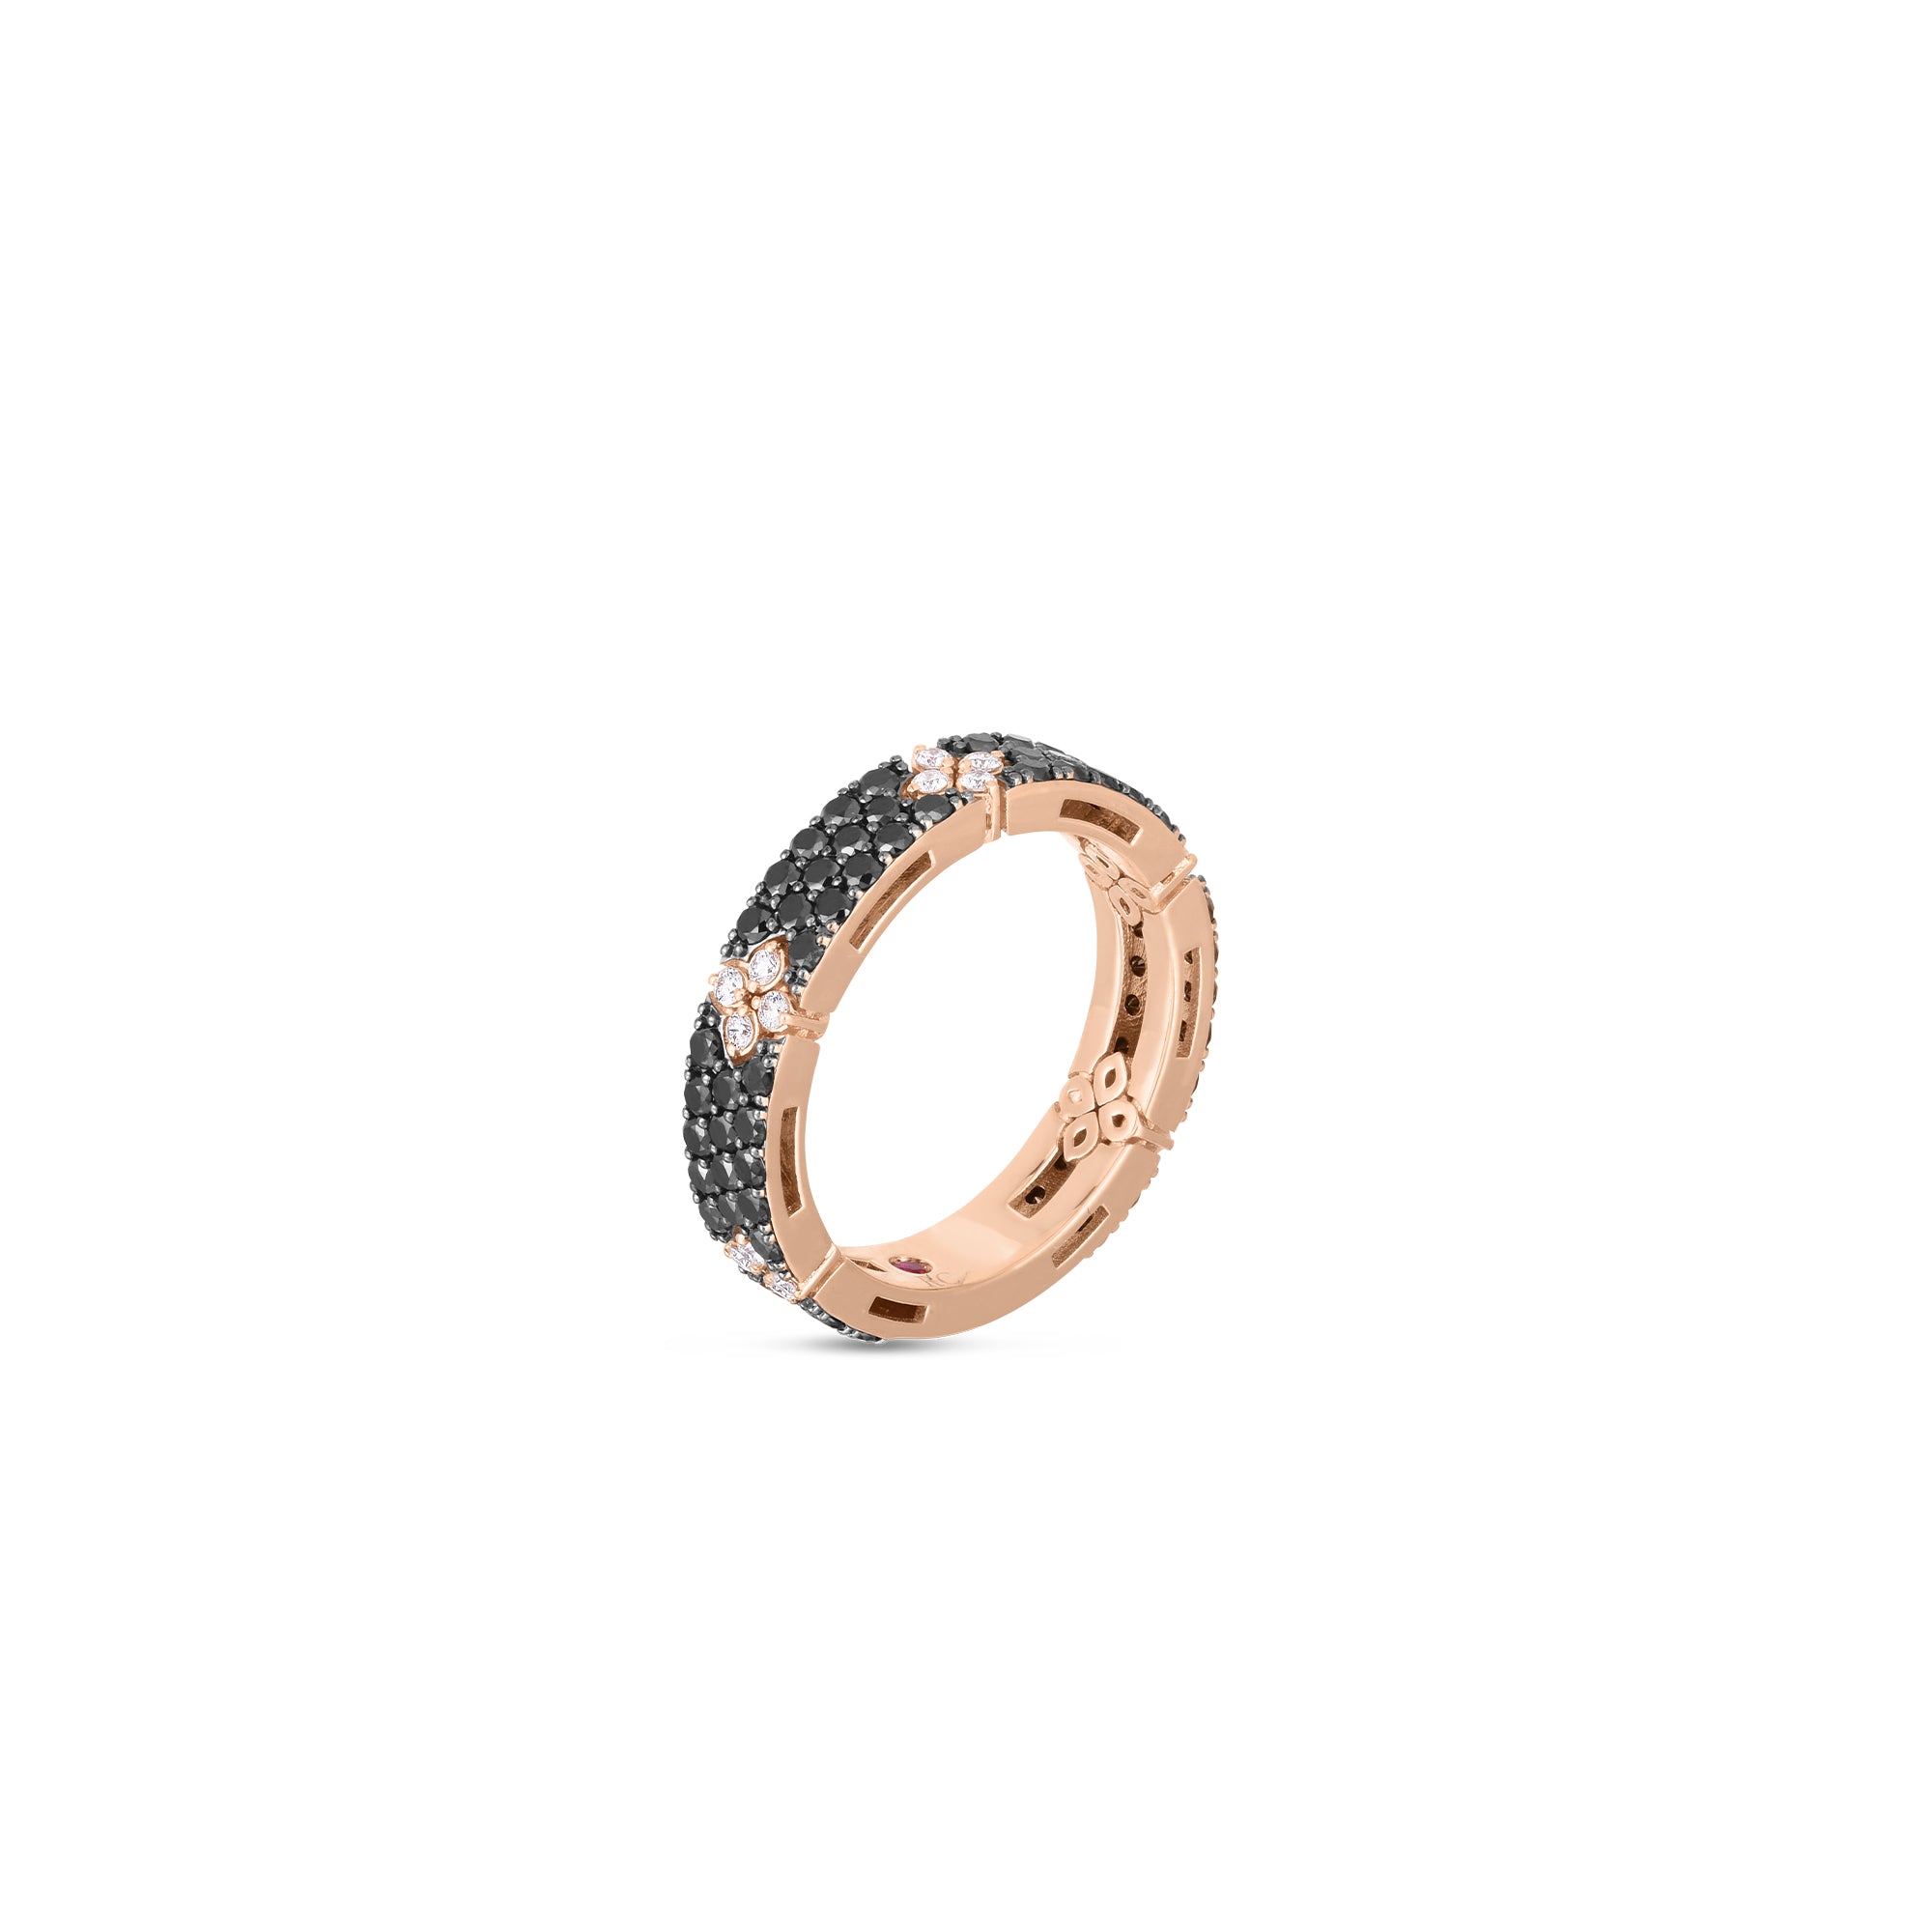 ROBERTO COIN 18K ROSE GOLD AND BLACK DIAMONDS 1.04CT ALONG WITH WHITE DIAMONDS 0.15CT BAND LOVE & VERONA COLLECTION